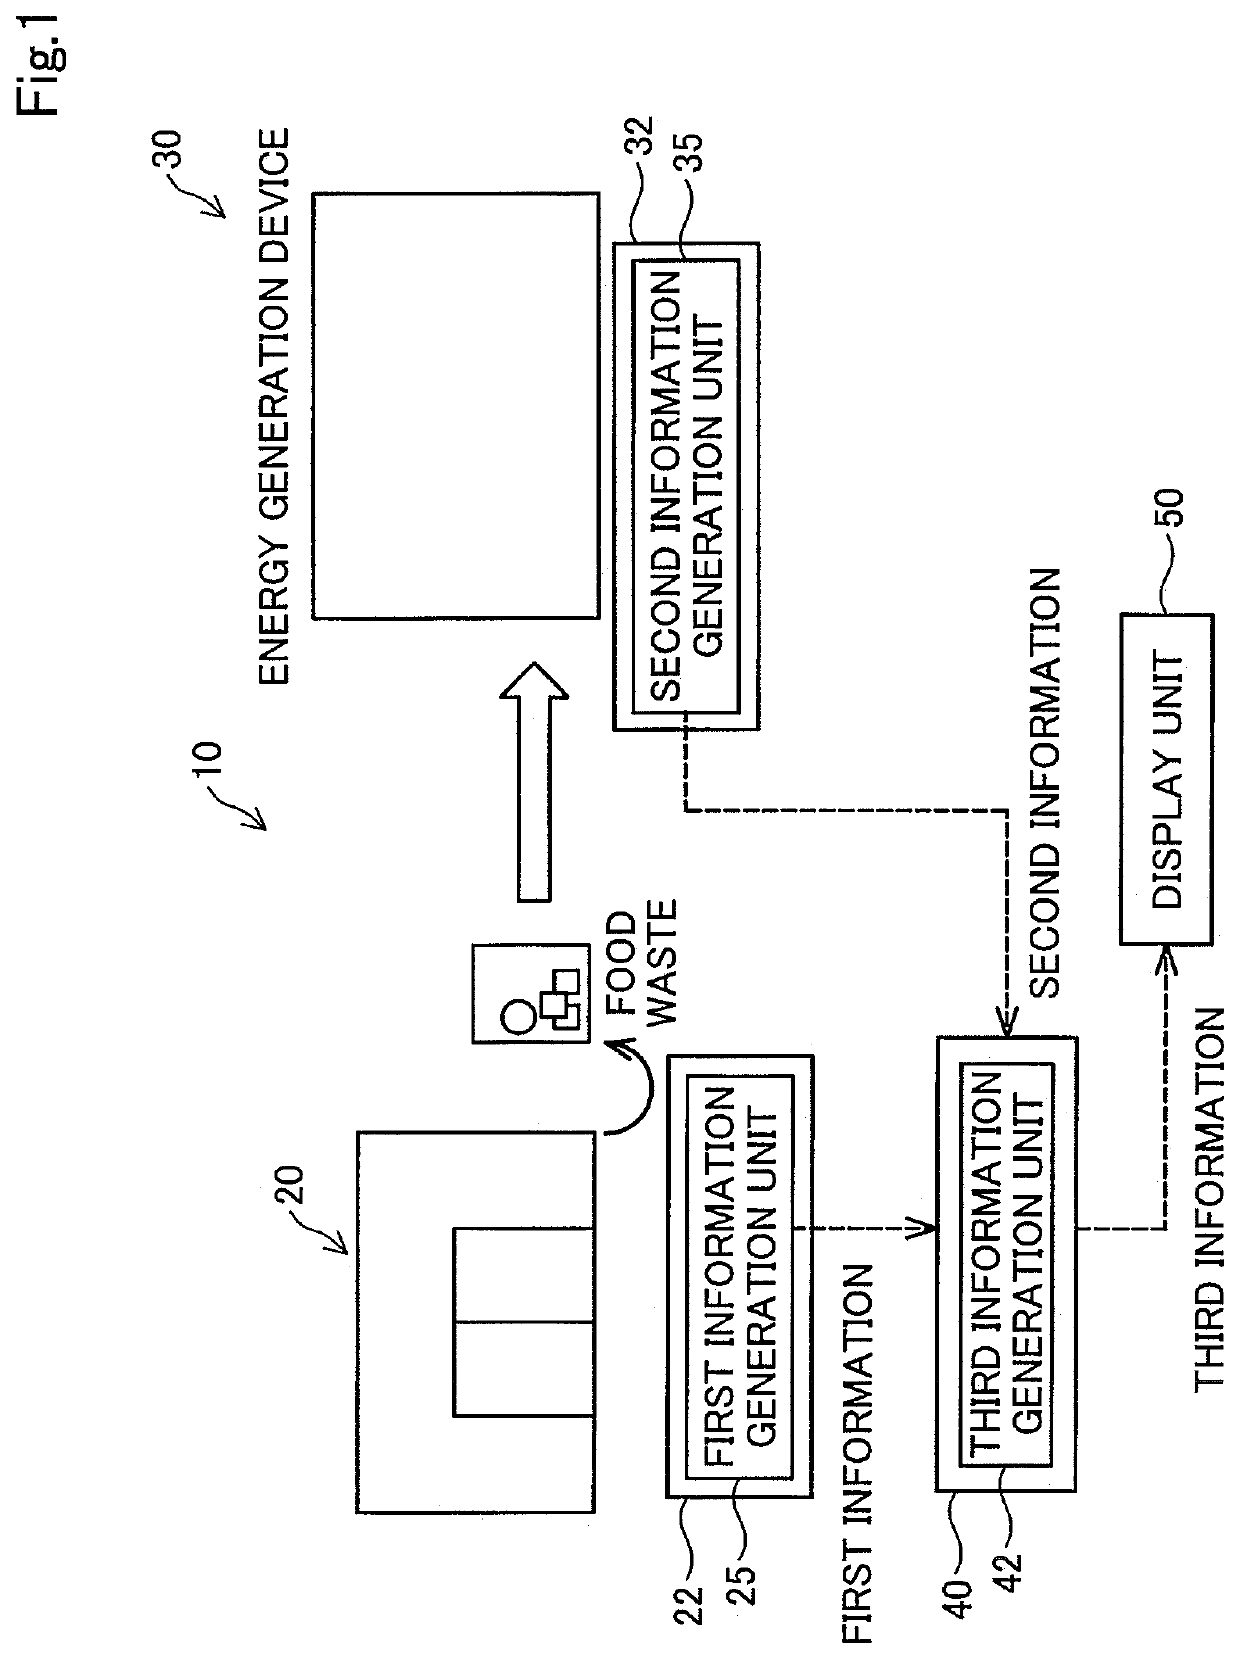 Energy generation system using biomass and method of controlling the same